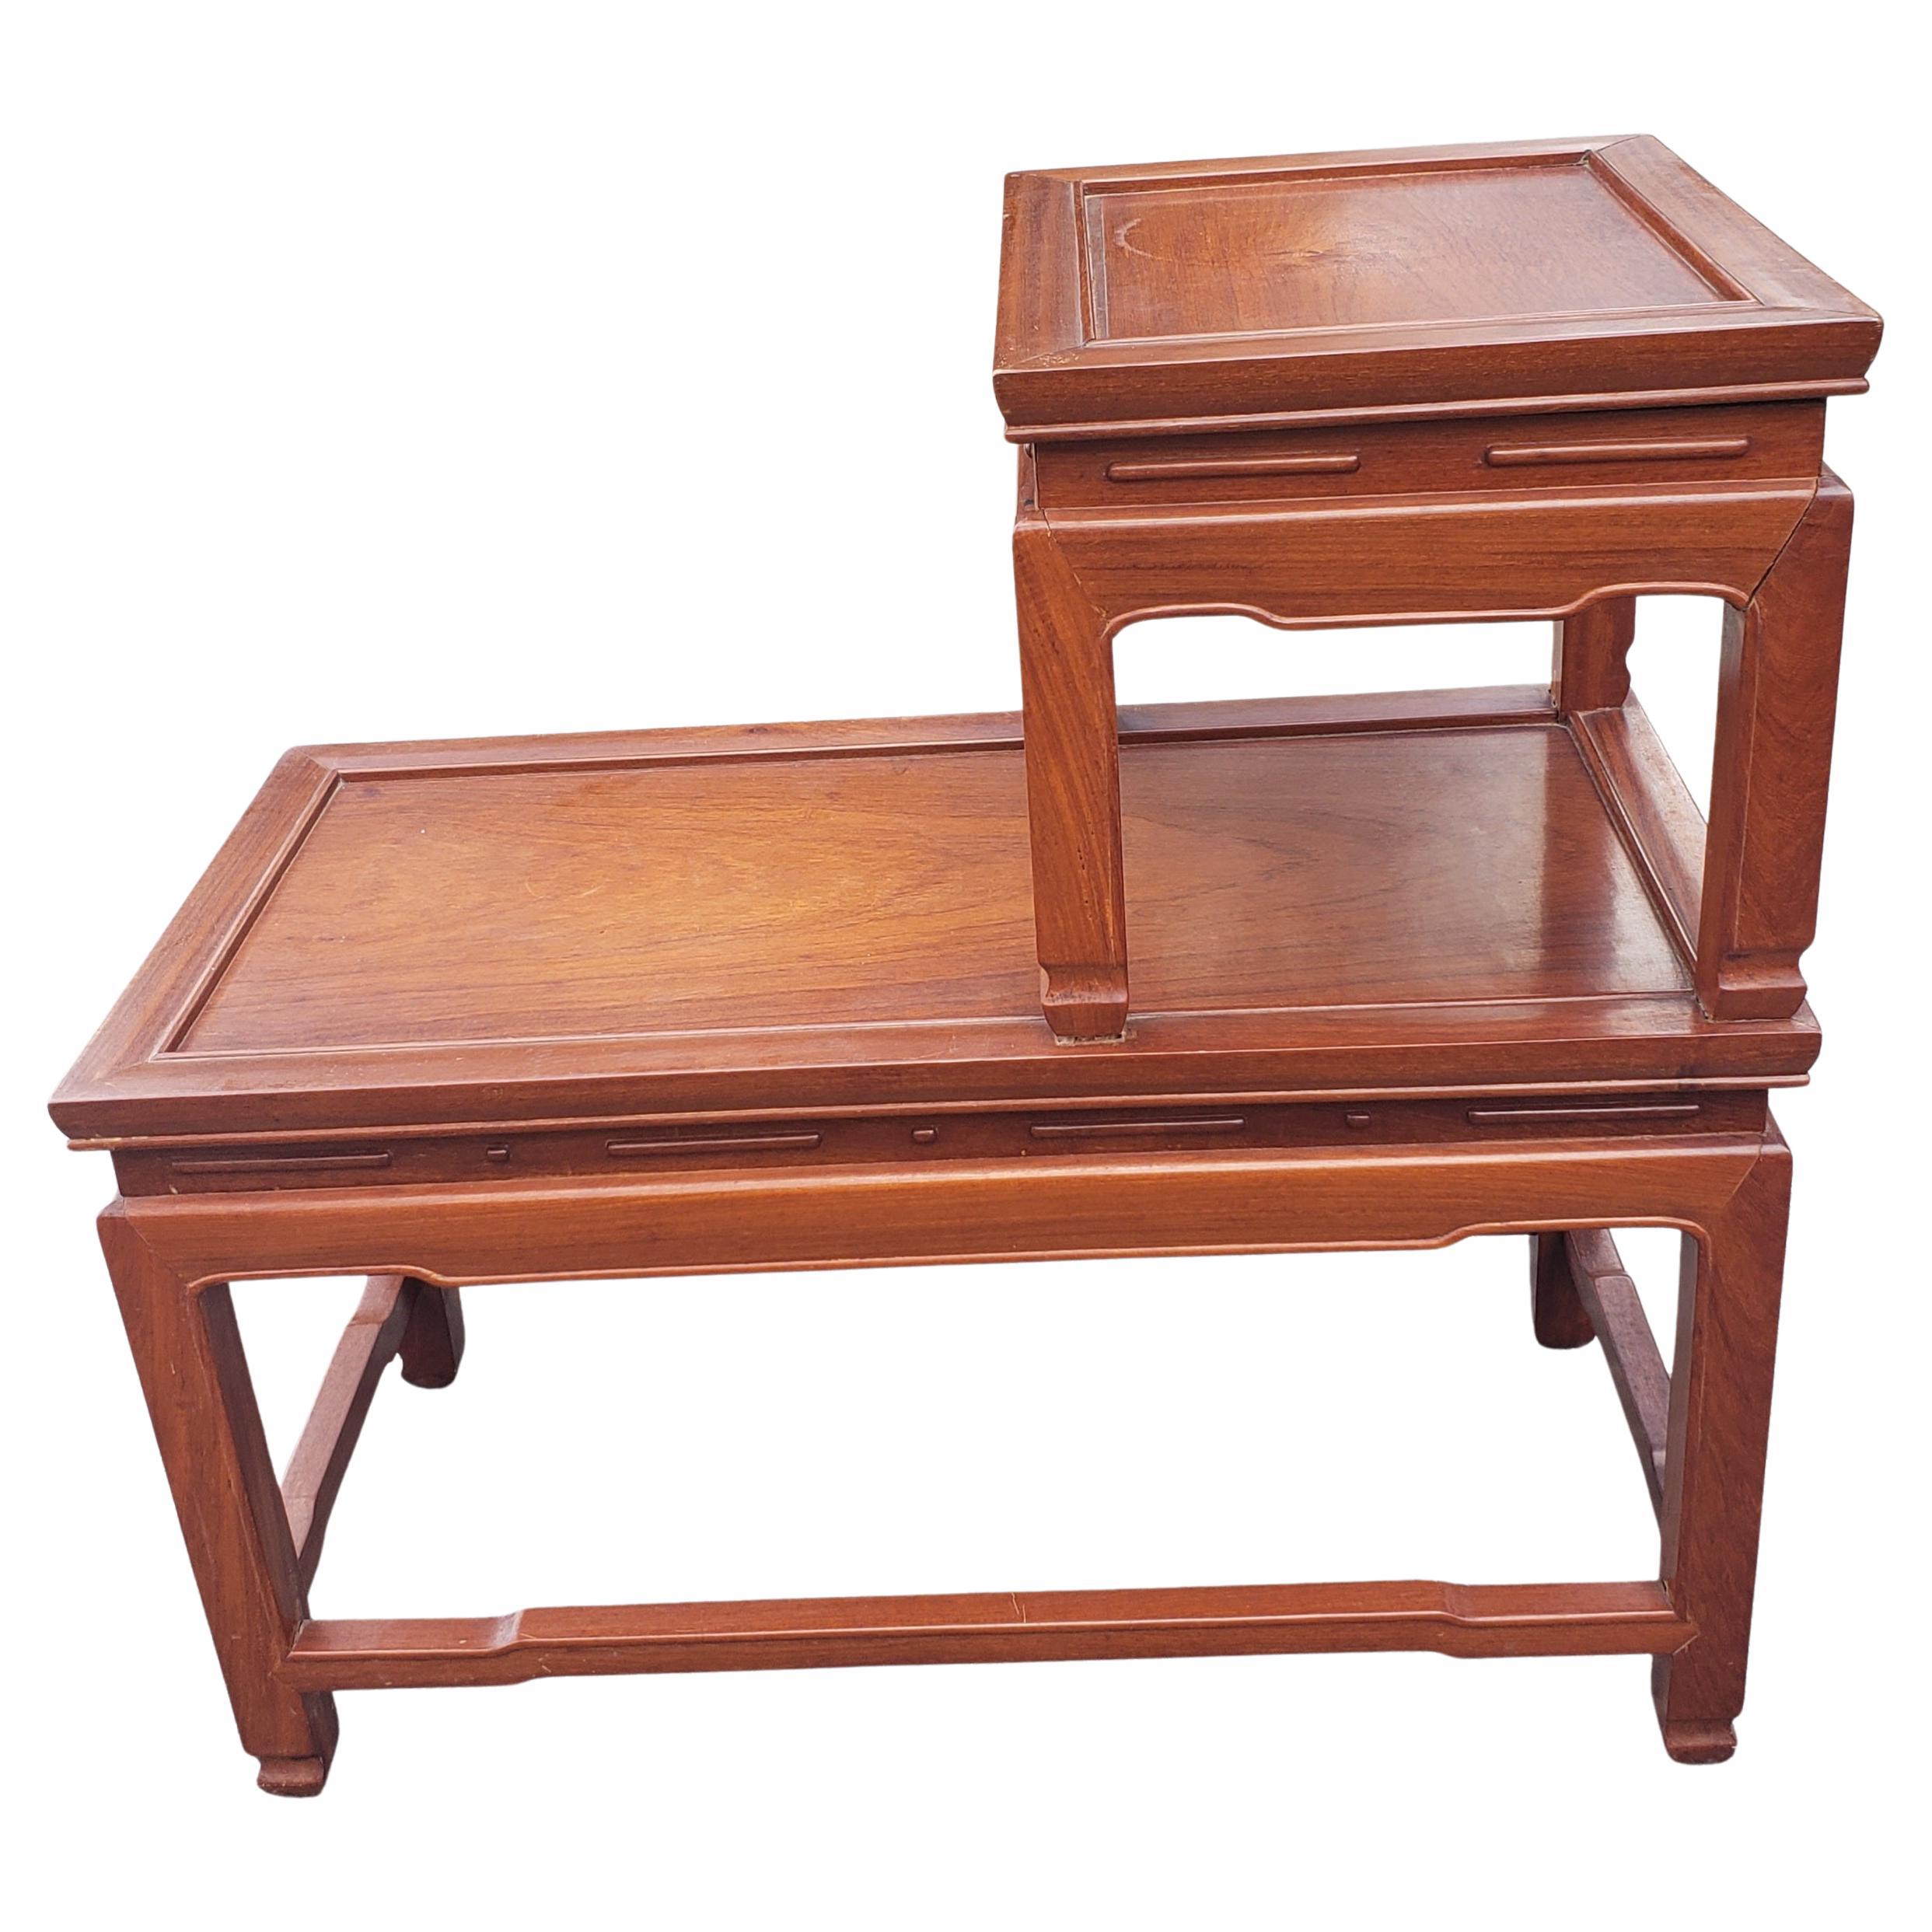 For your consideration is this fabulous pair of vintage Rosewood carved end tables, by George Zee.
 Stacked Ming style Chinese side table / end tables - hand crafted with kiln dried solid Rosewood.
Very well proportioned, great for smaller spaces